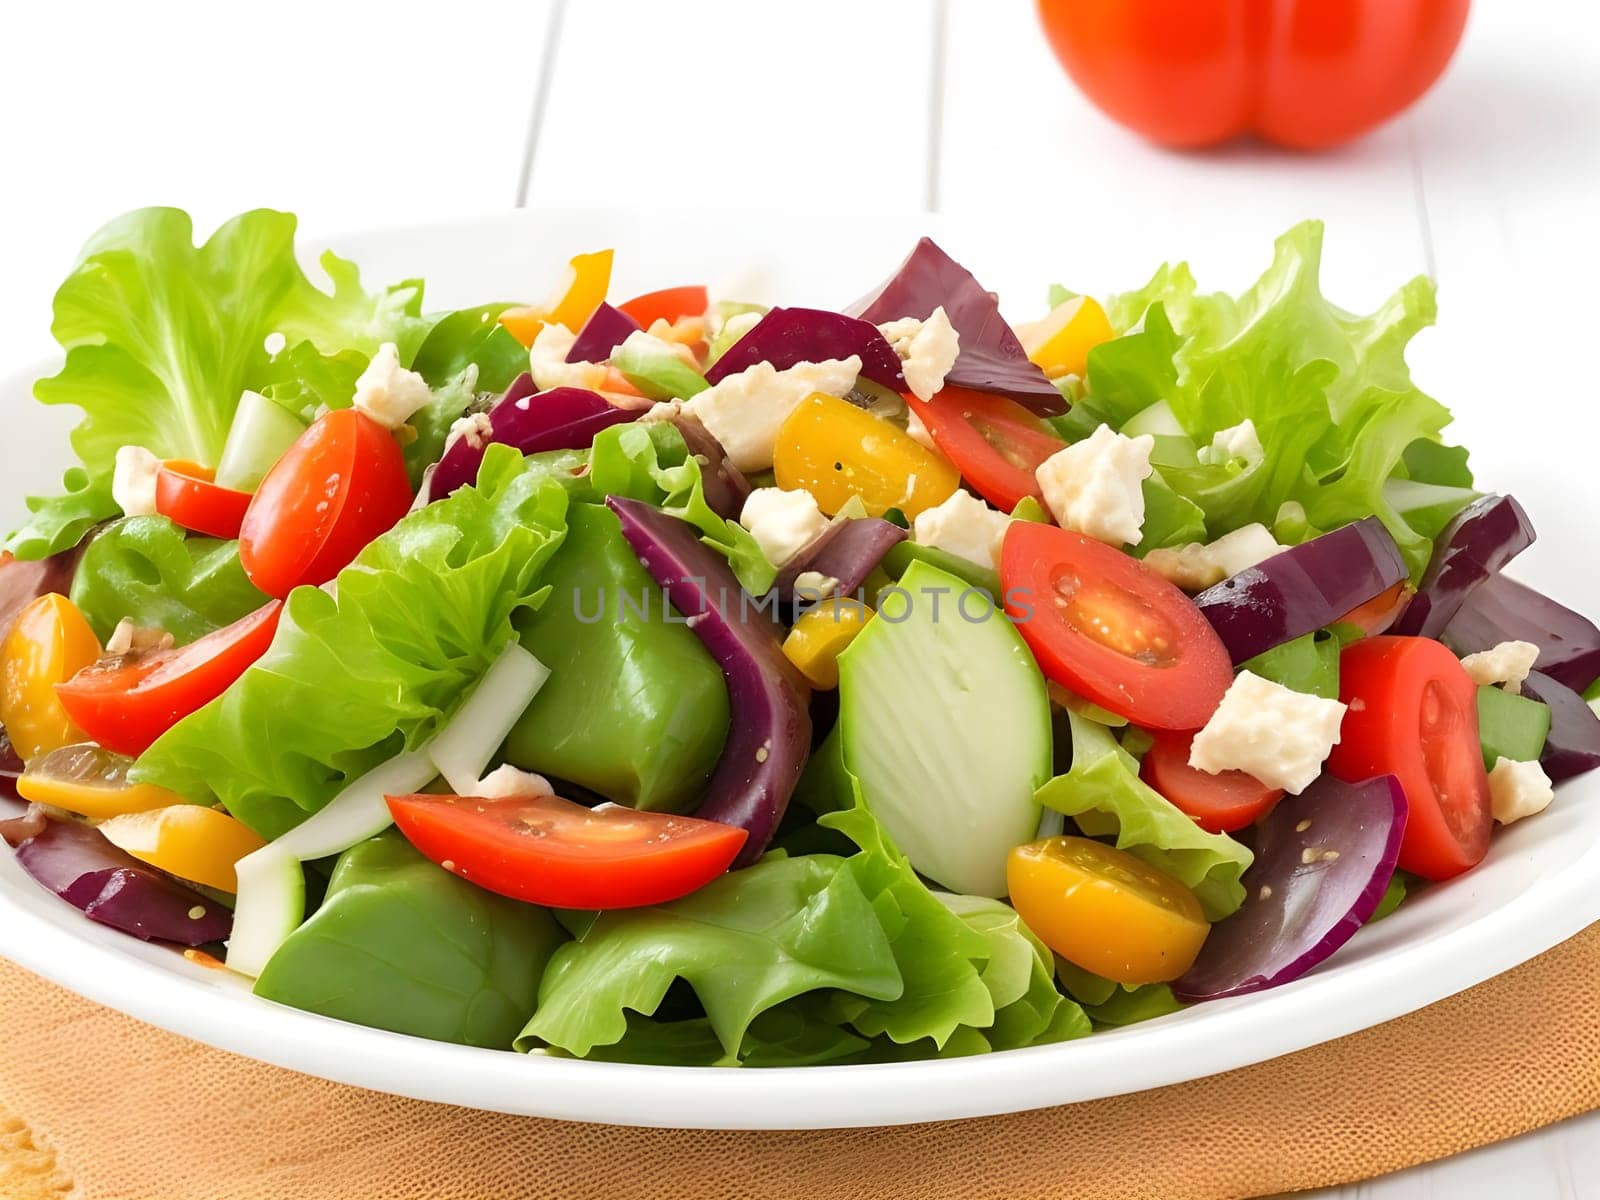 A mix of fresh greens and cherry tomatoes in a vibrant salad delight.